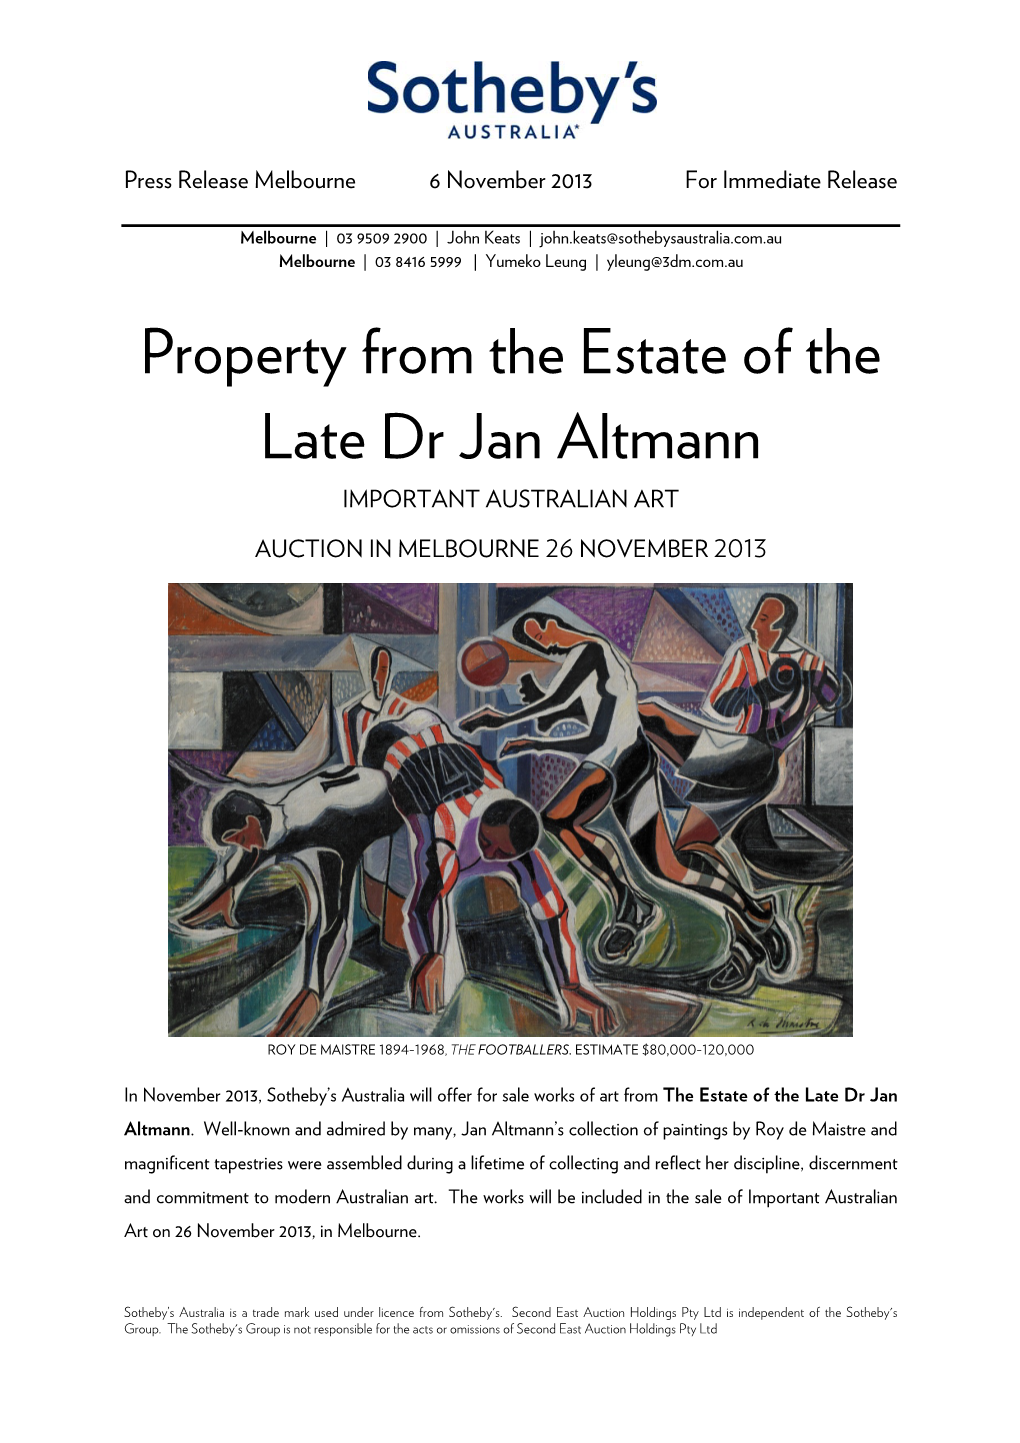 Property from the Estate of the Late Dr Jan Altmann Auction in Melbourne Anzac House, Level 1, 4, Collins Street, Melbourne 26 November 2013 | 6.30 Pm